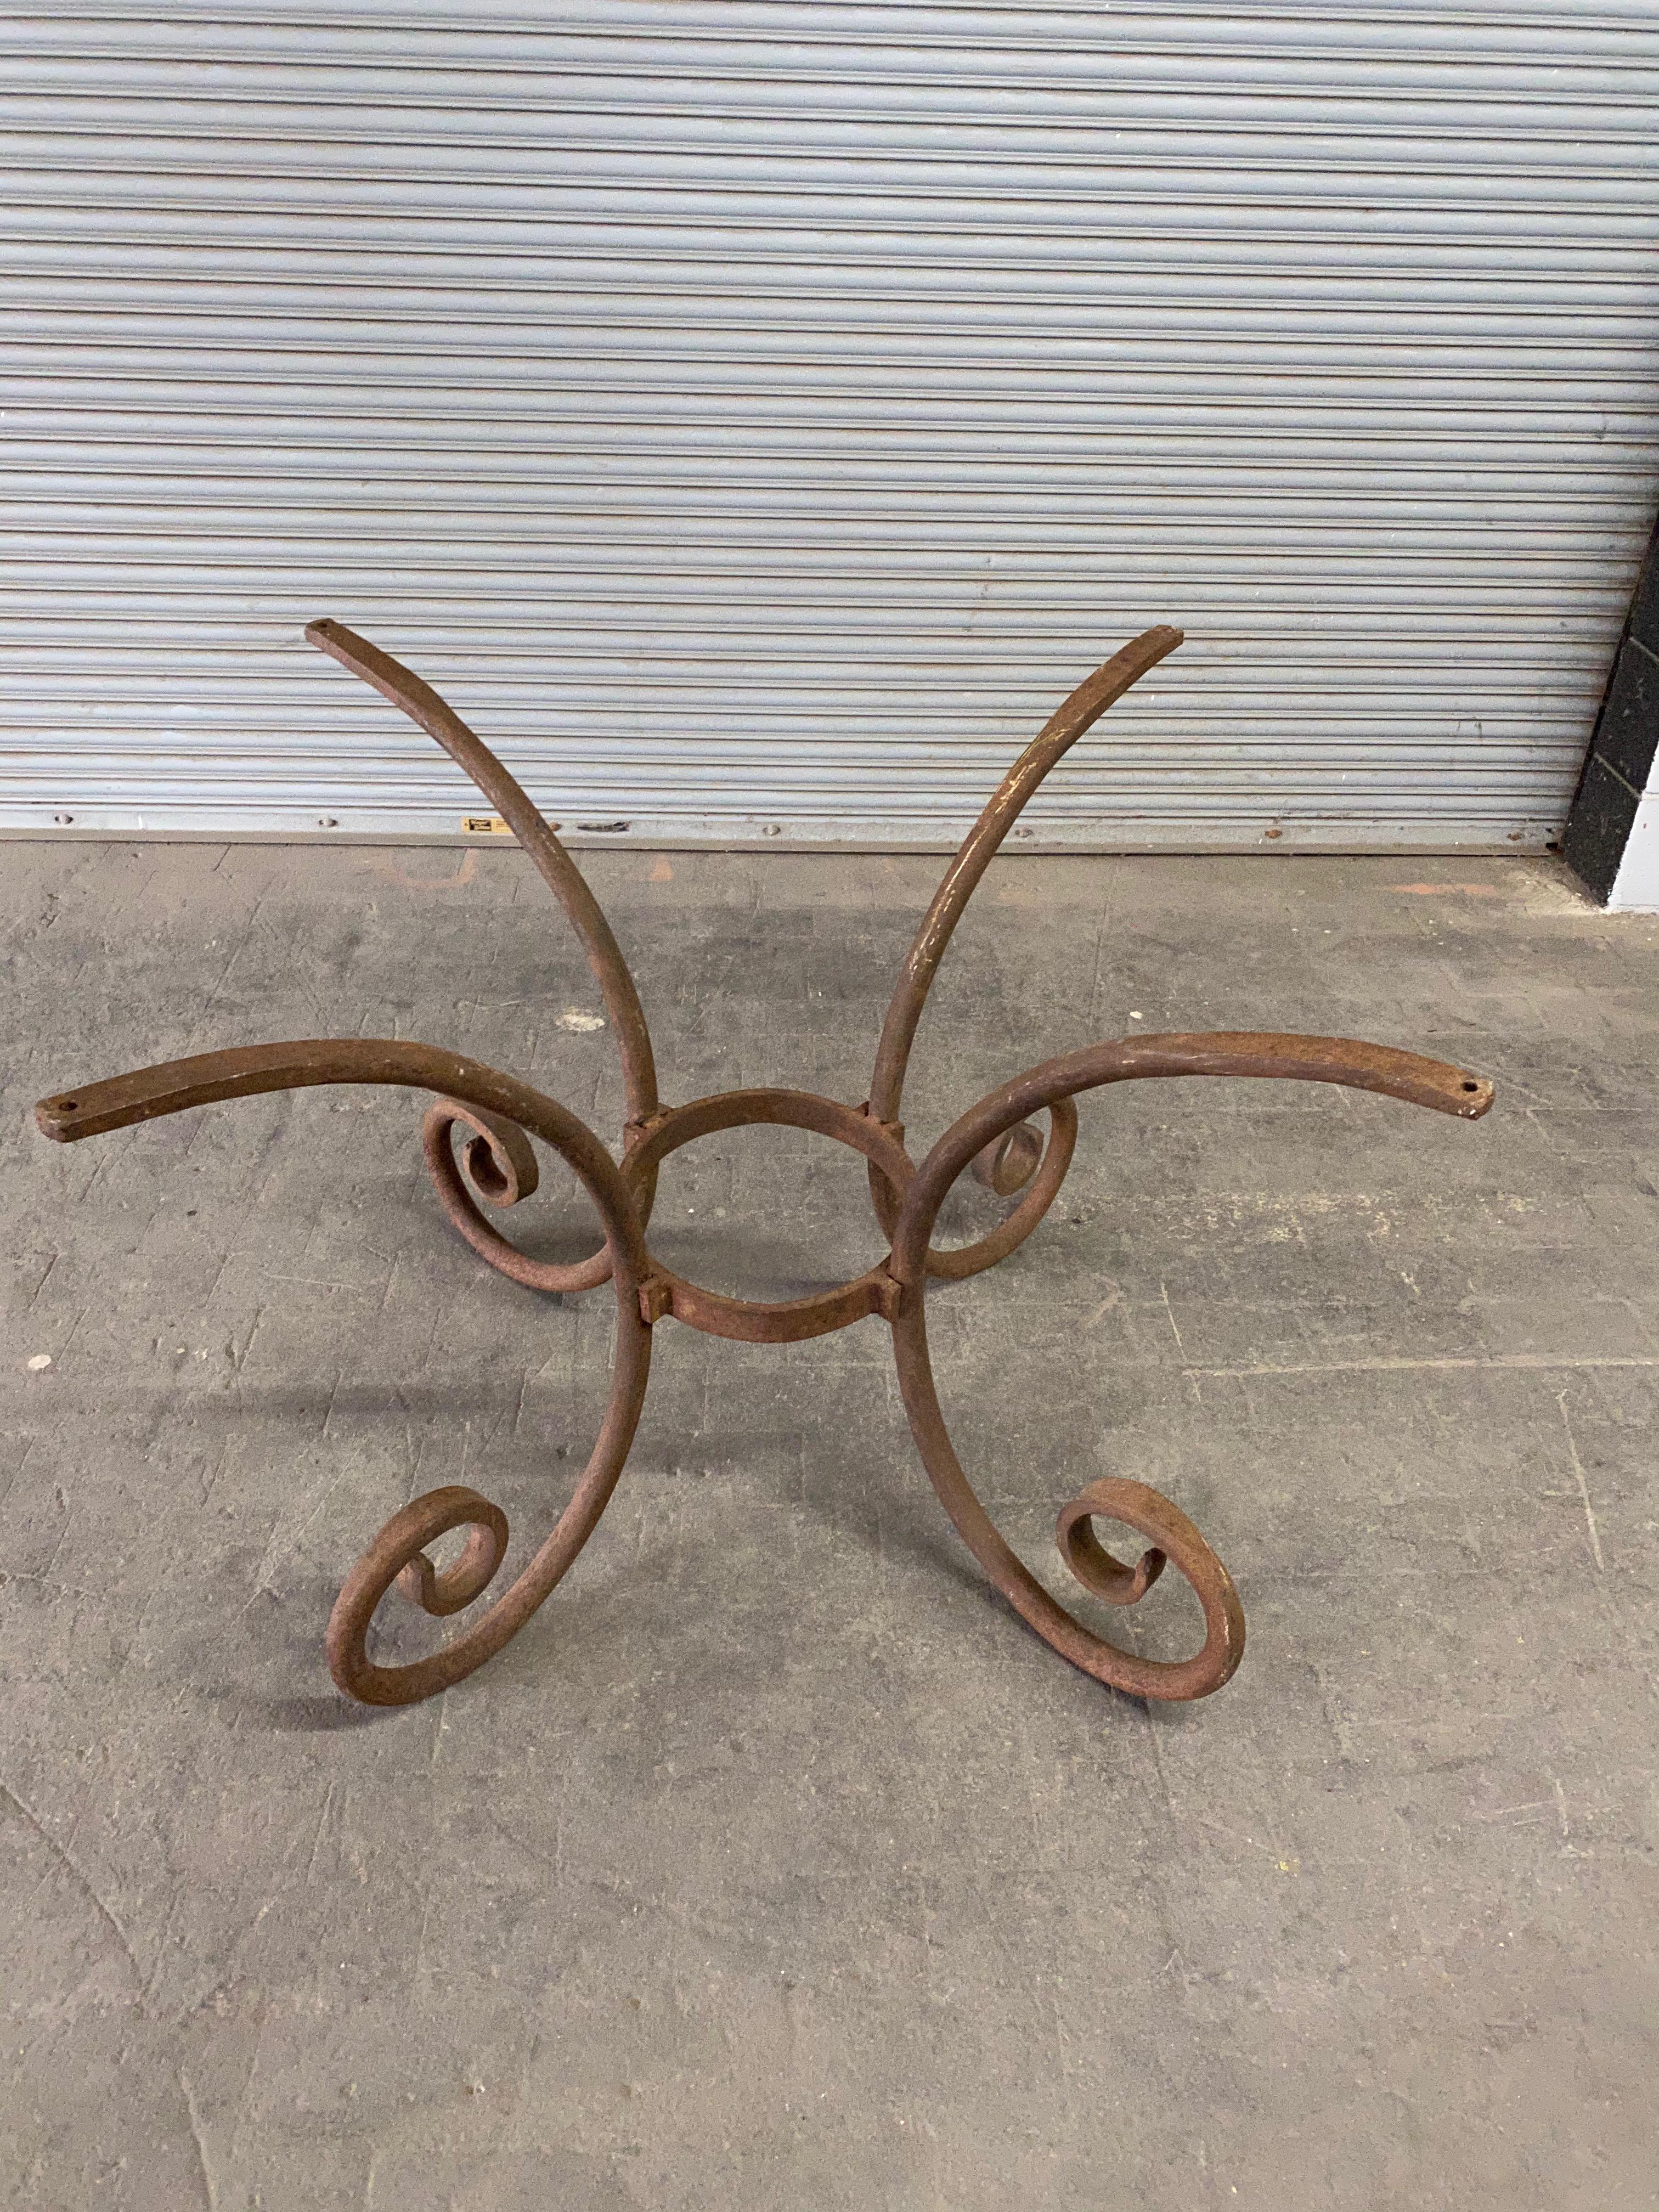 French wrought iron oval table base, contemporary design. This table base is very well made and heavy. It is suitable for a large stone top. The table base has a rusted finished but can reality be prepped for paint.

 